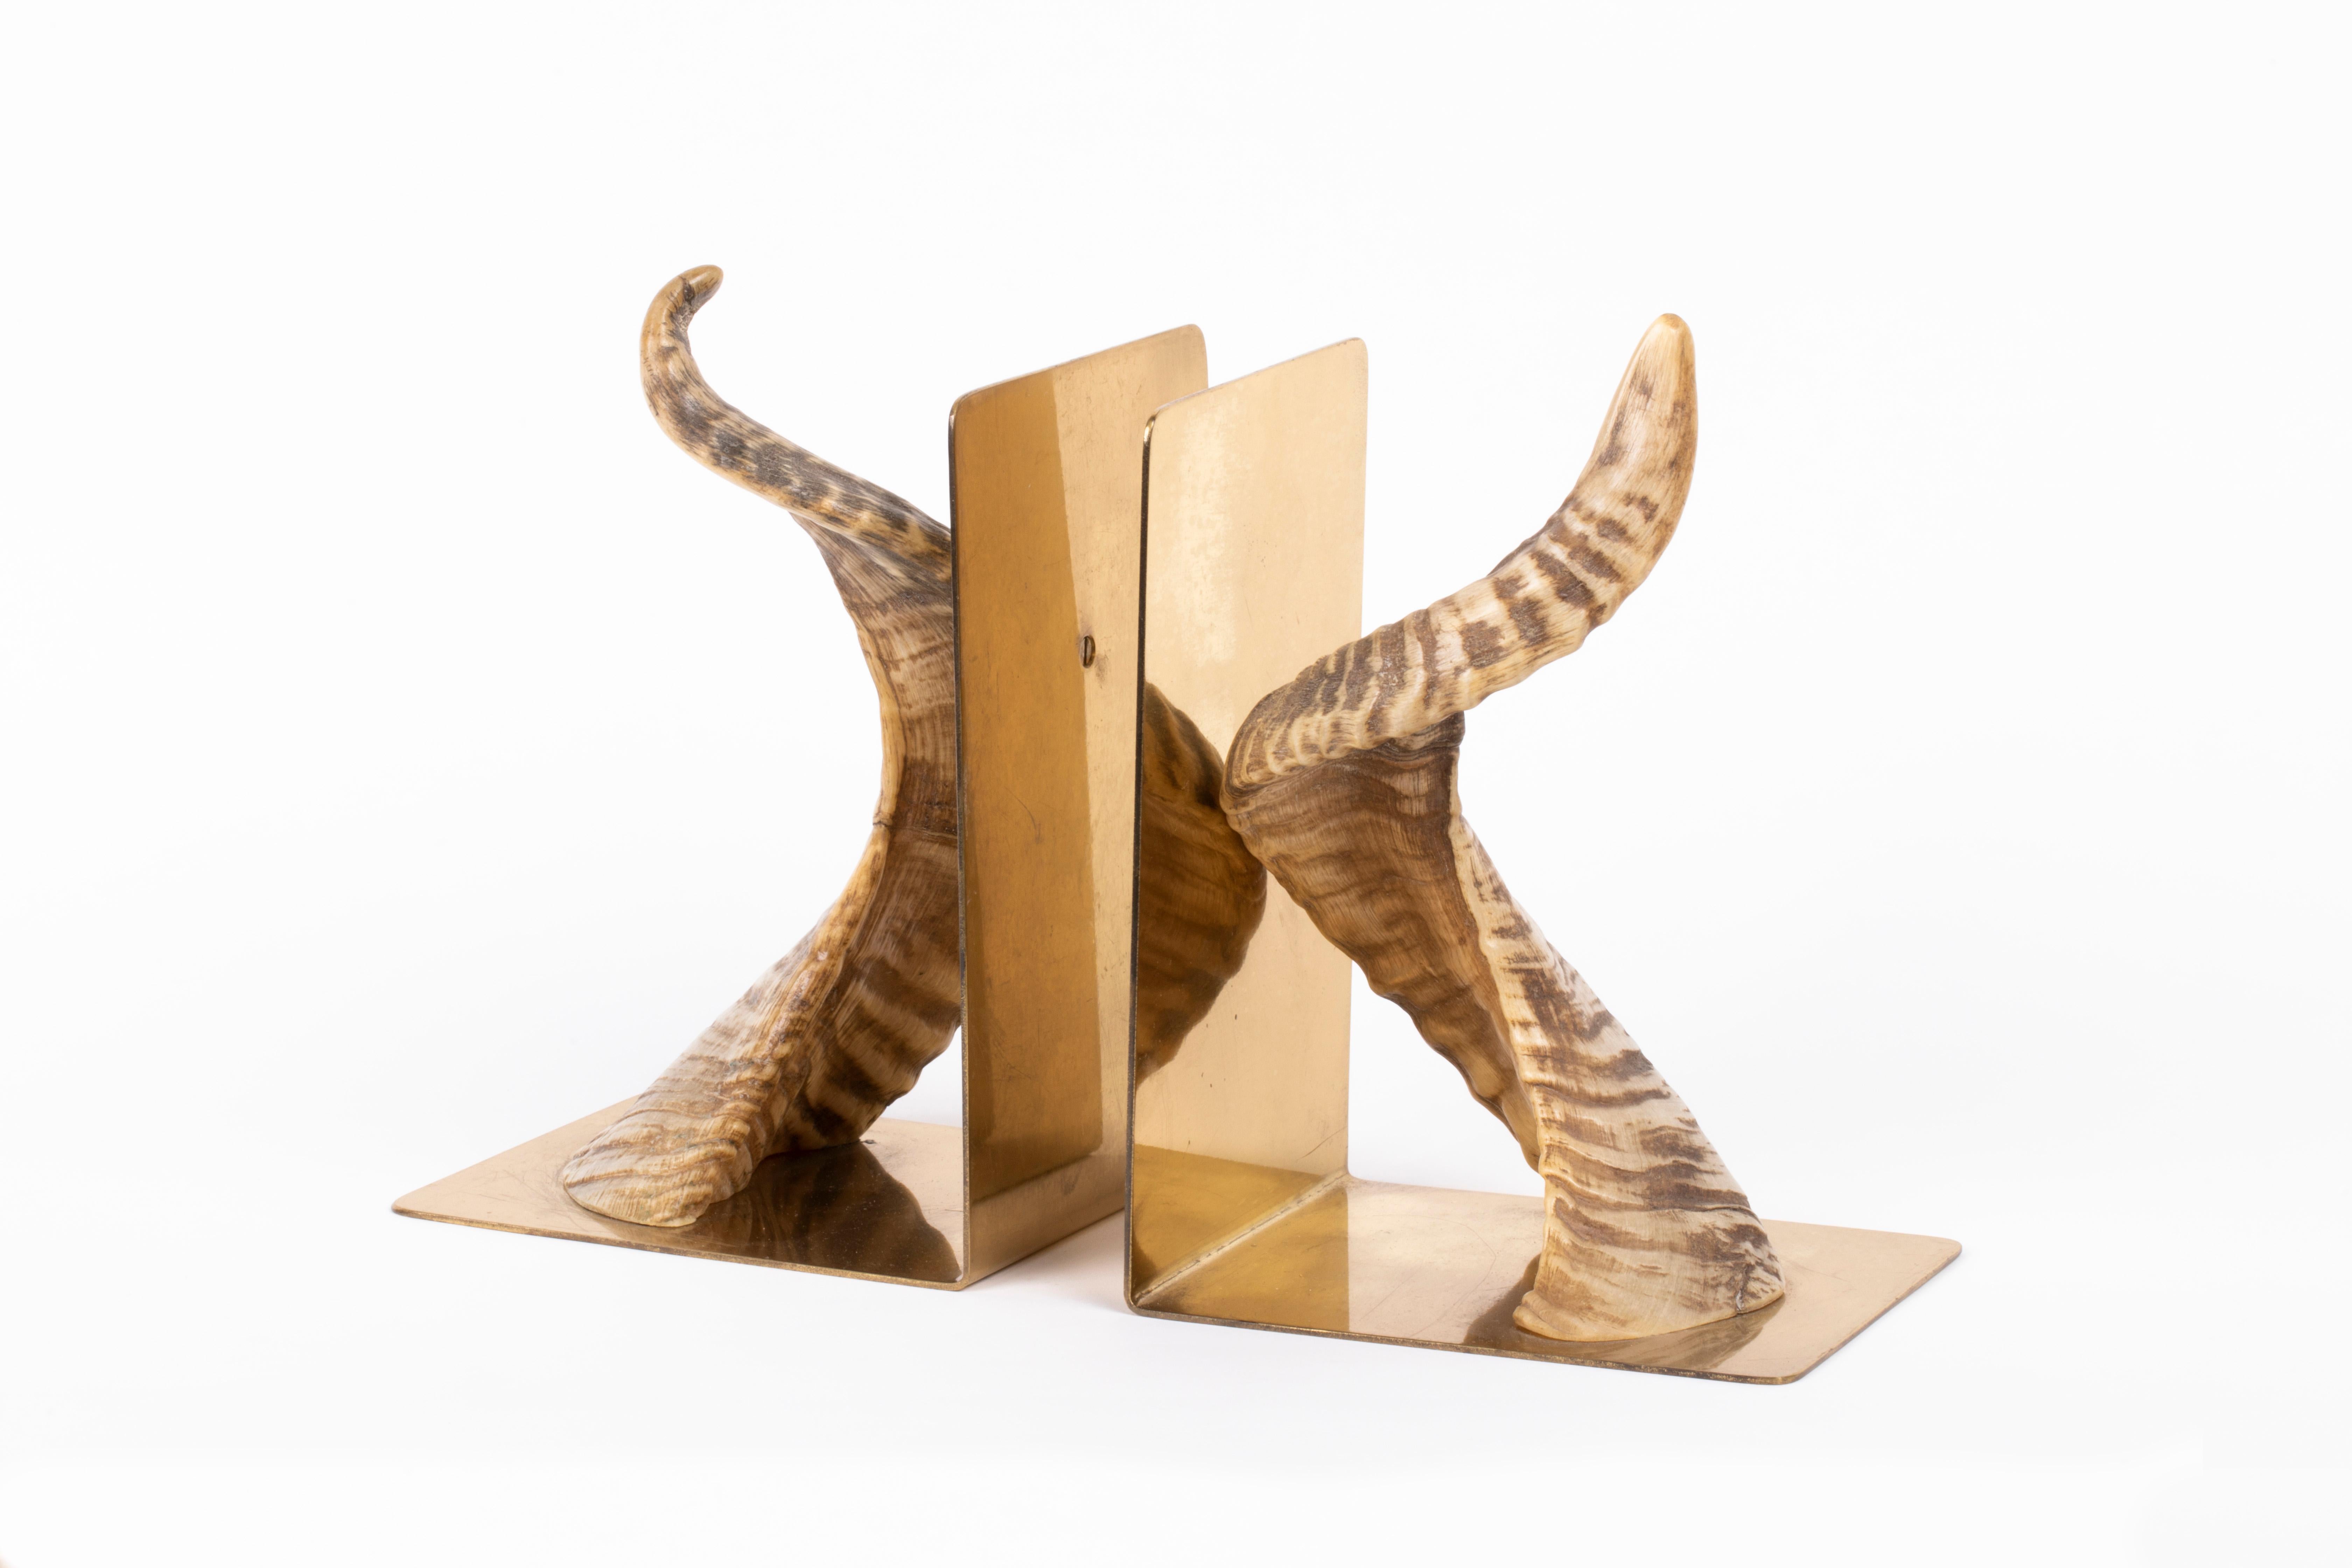 Carl Auböck pair of brass and horn bookends, Austria 1960s. The part made of Horn measures 9x11x20 cm.